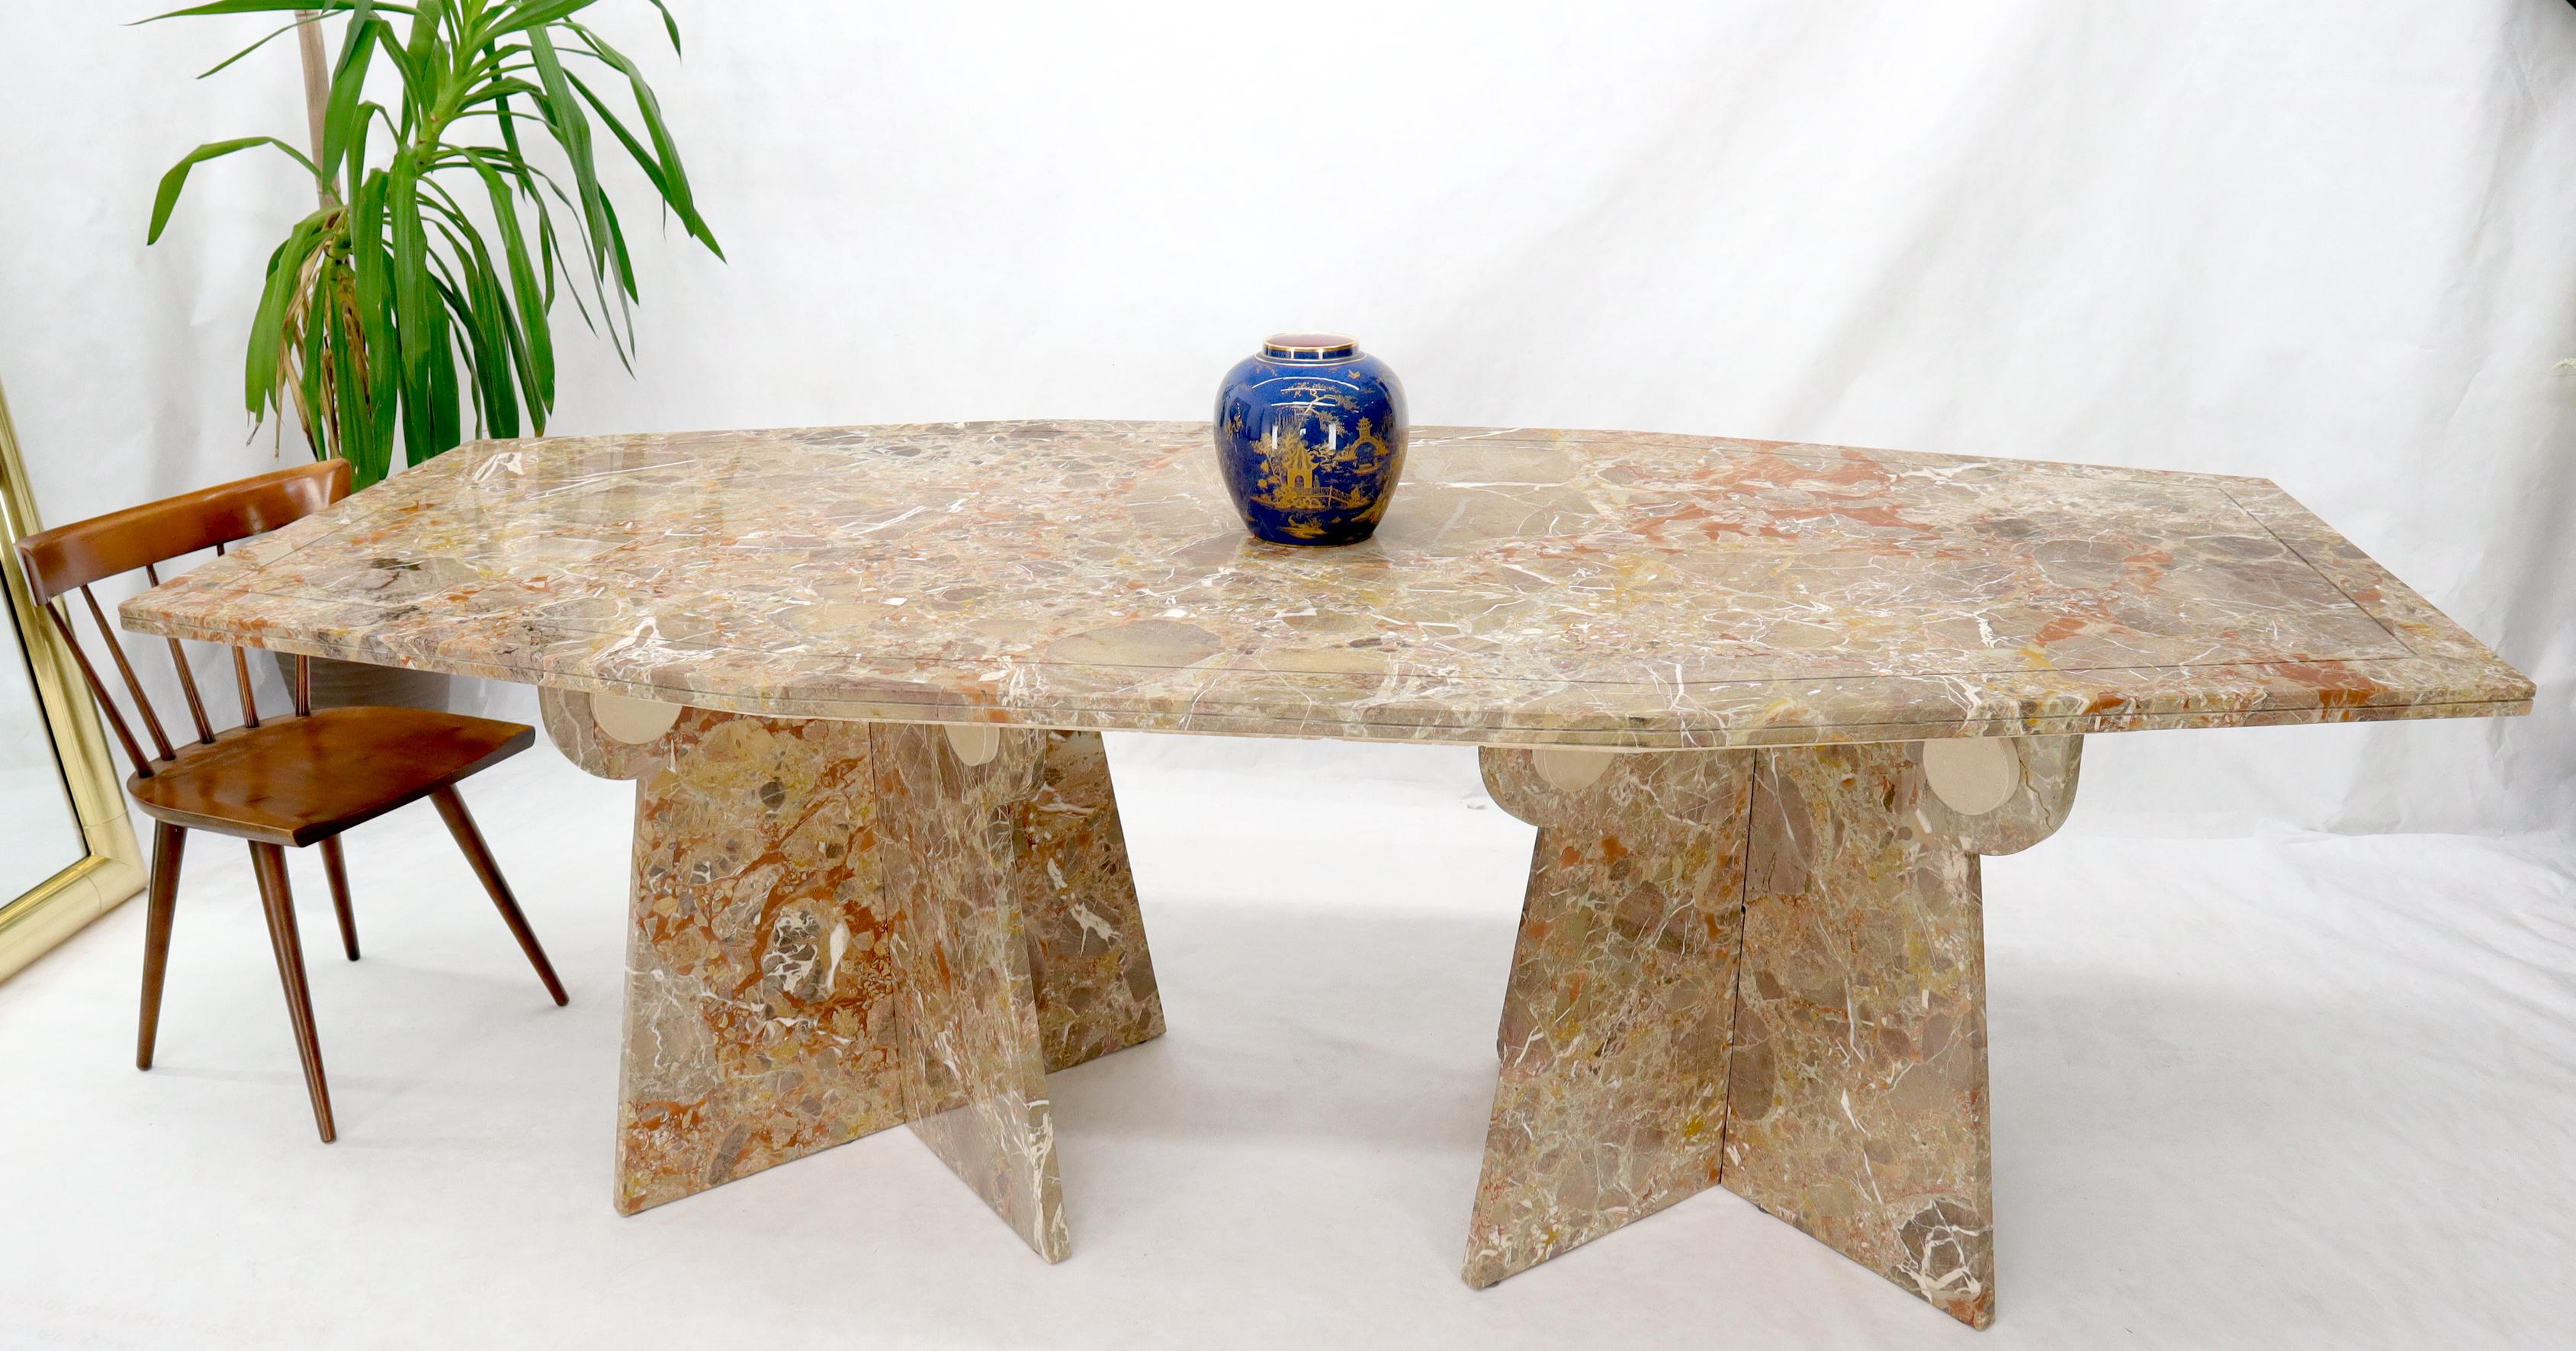 20th Century Large Marble Boat Shape Top Dining Conference Table on Cross Shape Bases For Sale